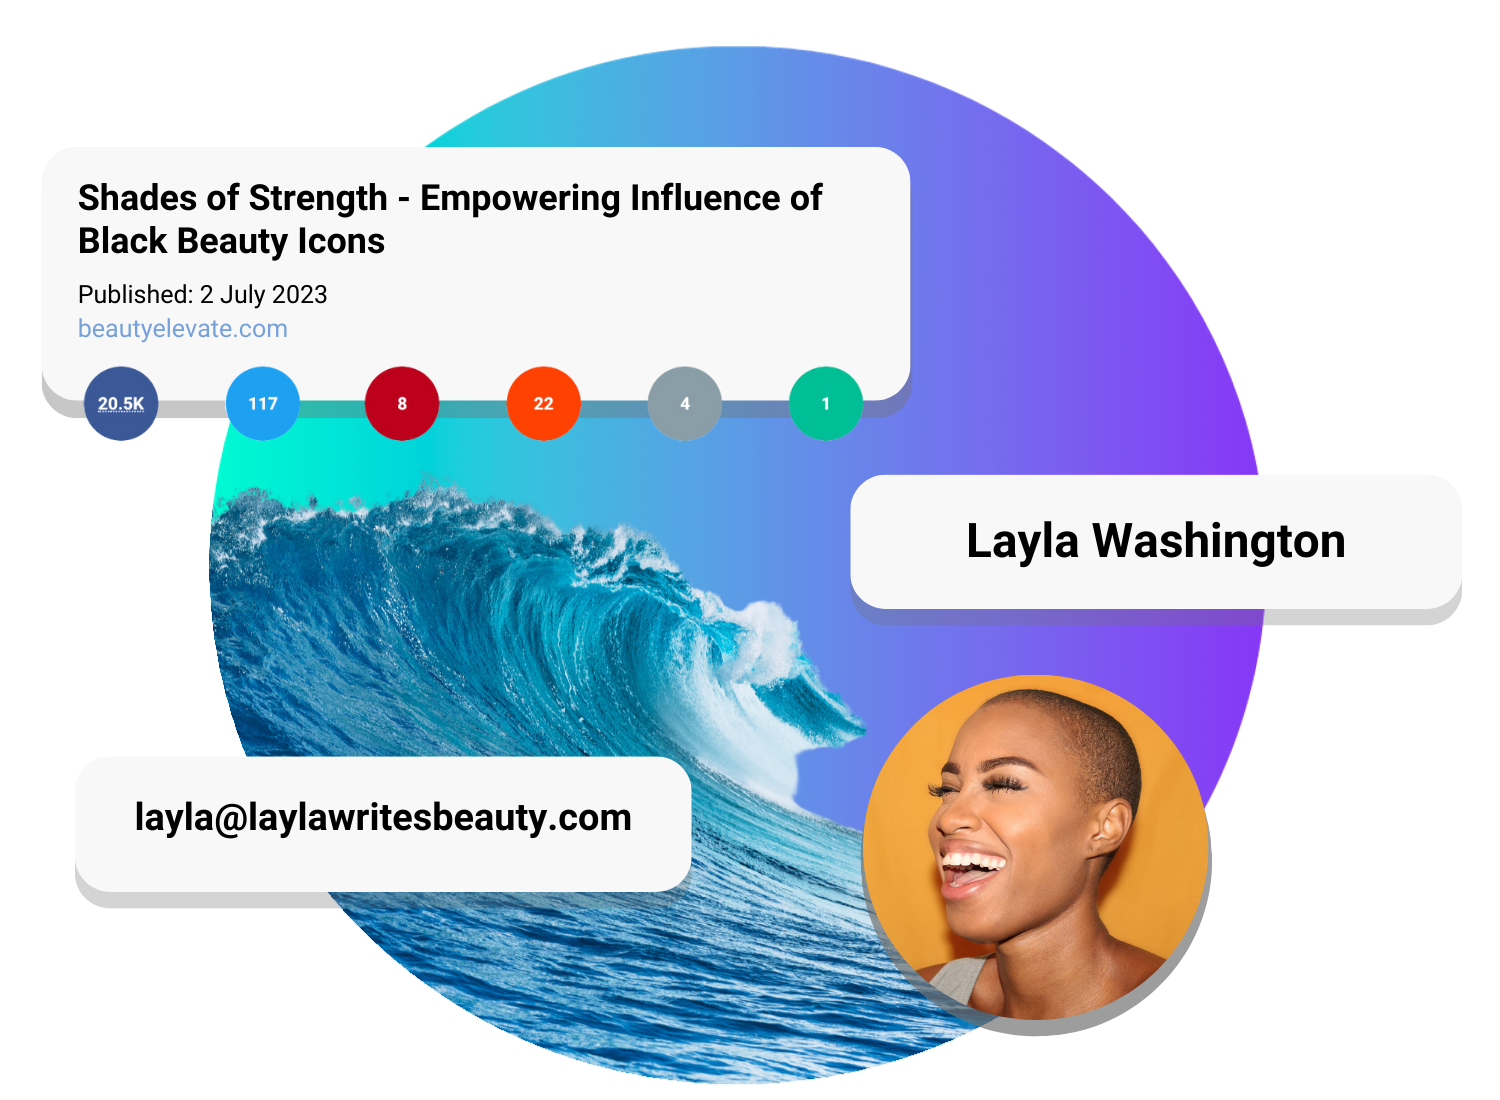 A colorful circle overlaid with the image of an ocean wave. Overlaid across that are journalist details – including an article showing BuzzSumo engagement data, a name, photo and email. The journalist is clearly a beauty journalist.